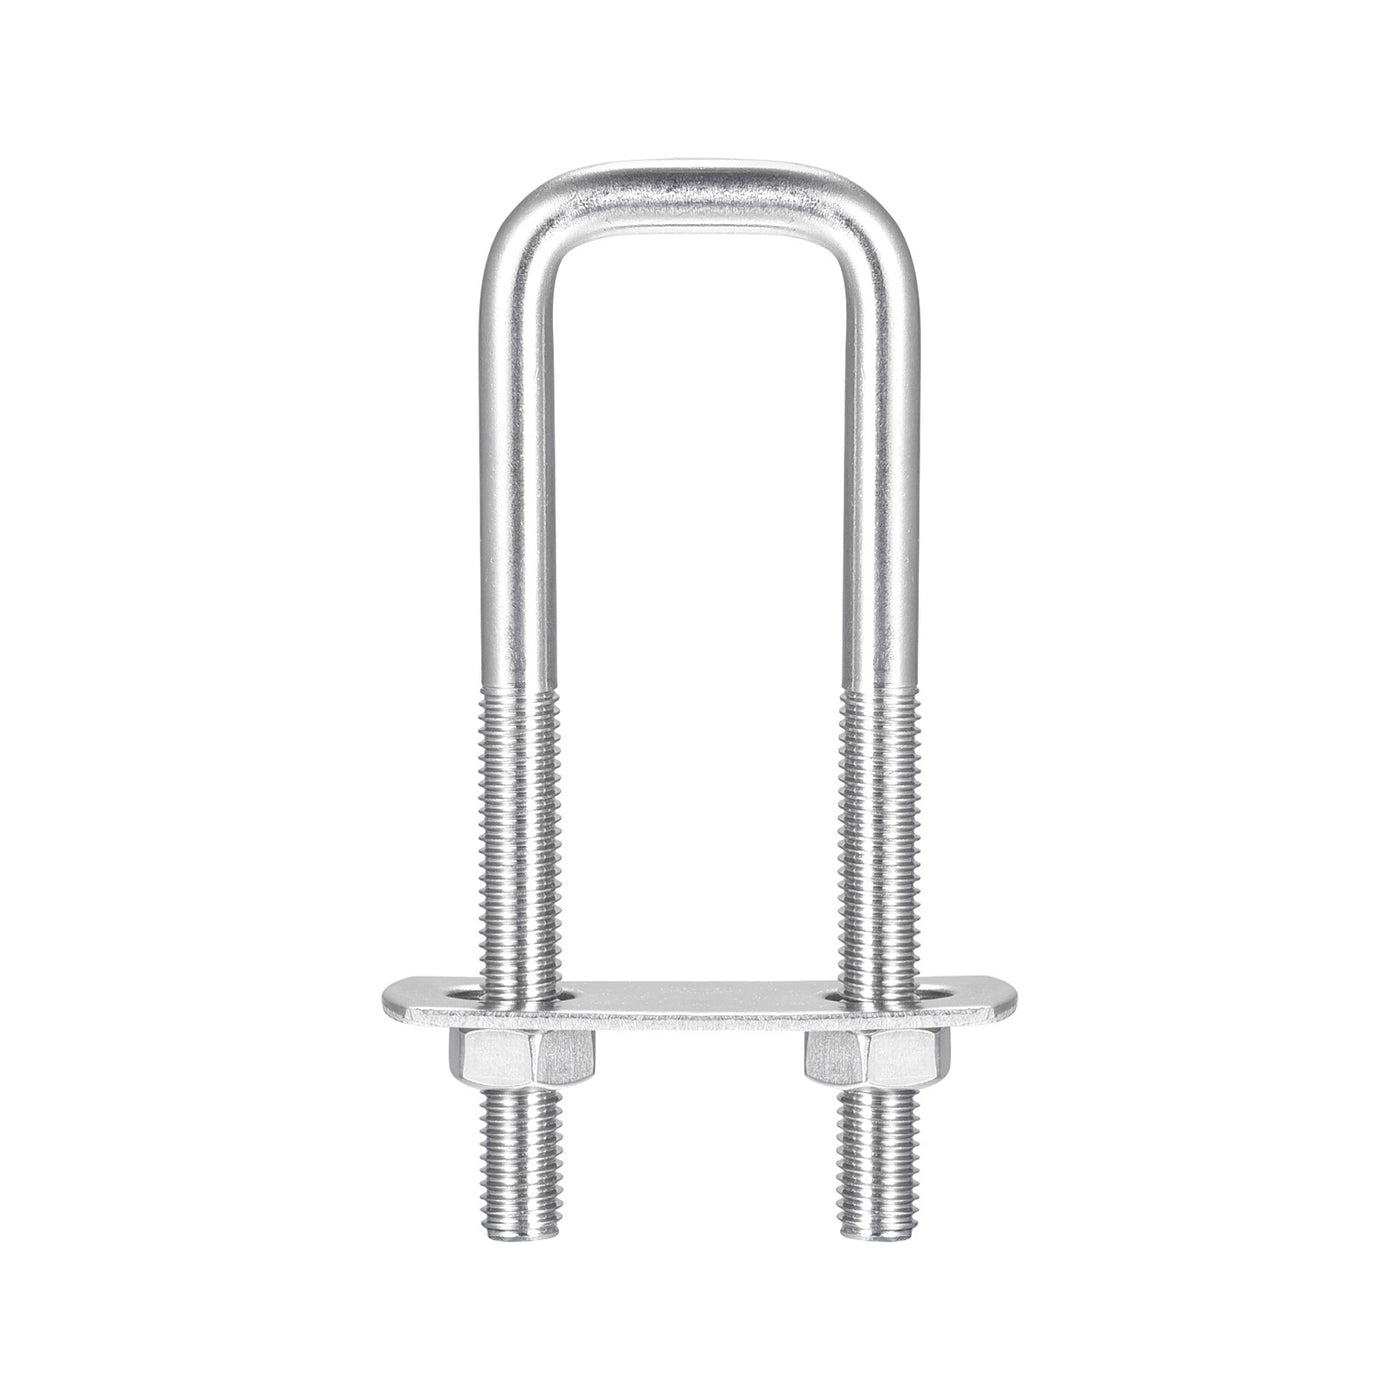 uxcell Uxcell Square U-Bolts 304 Stainless Steel, U Bolt with Nuts and Plates, for Boat Trailer